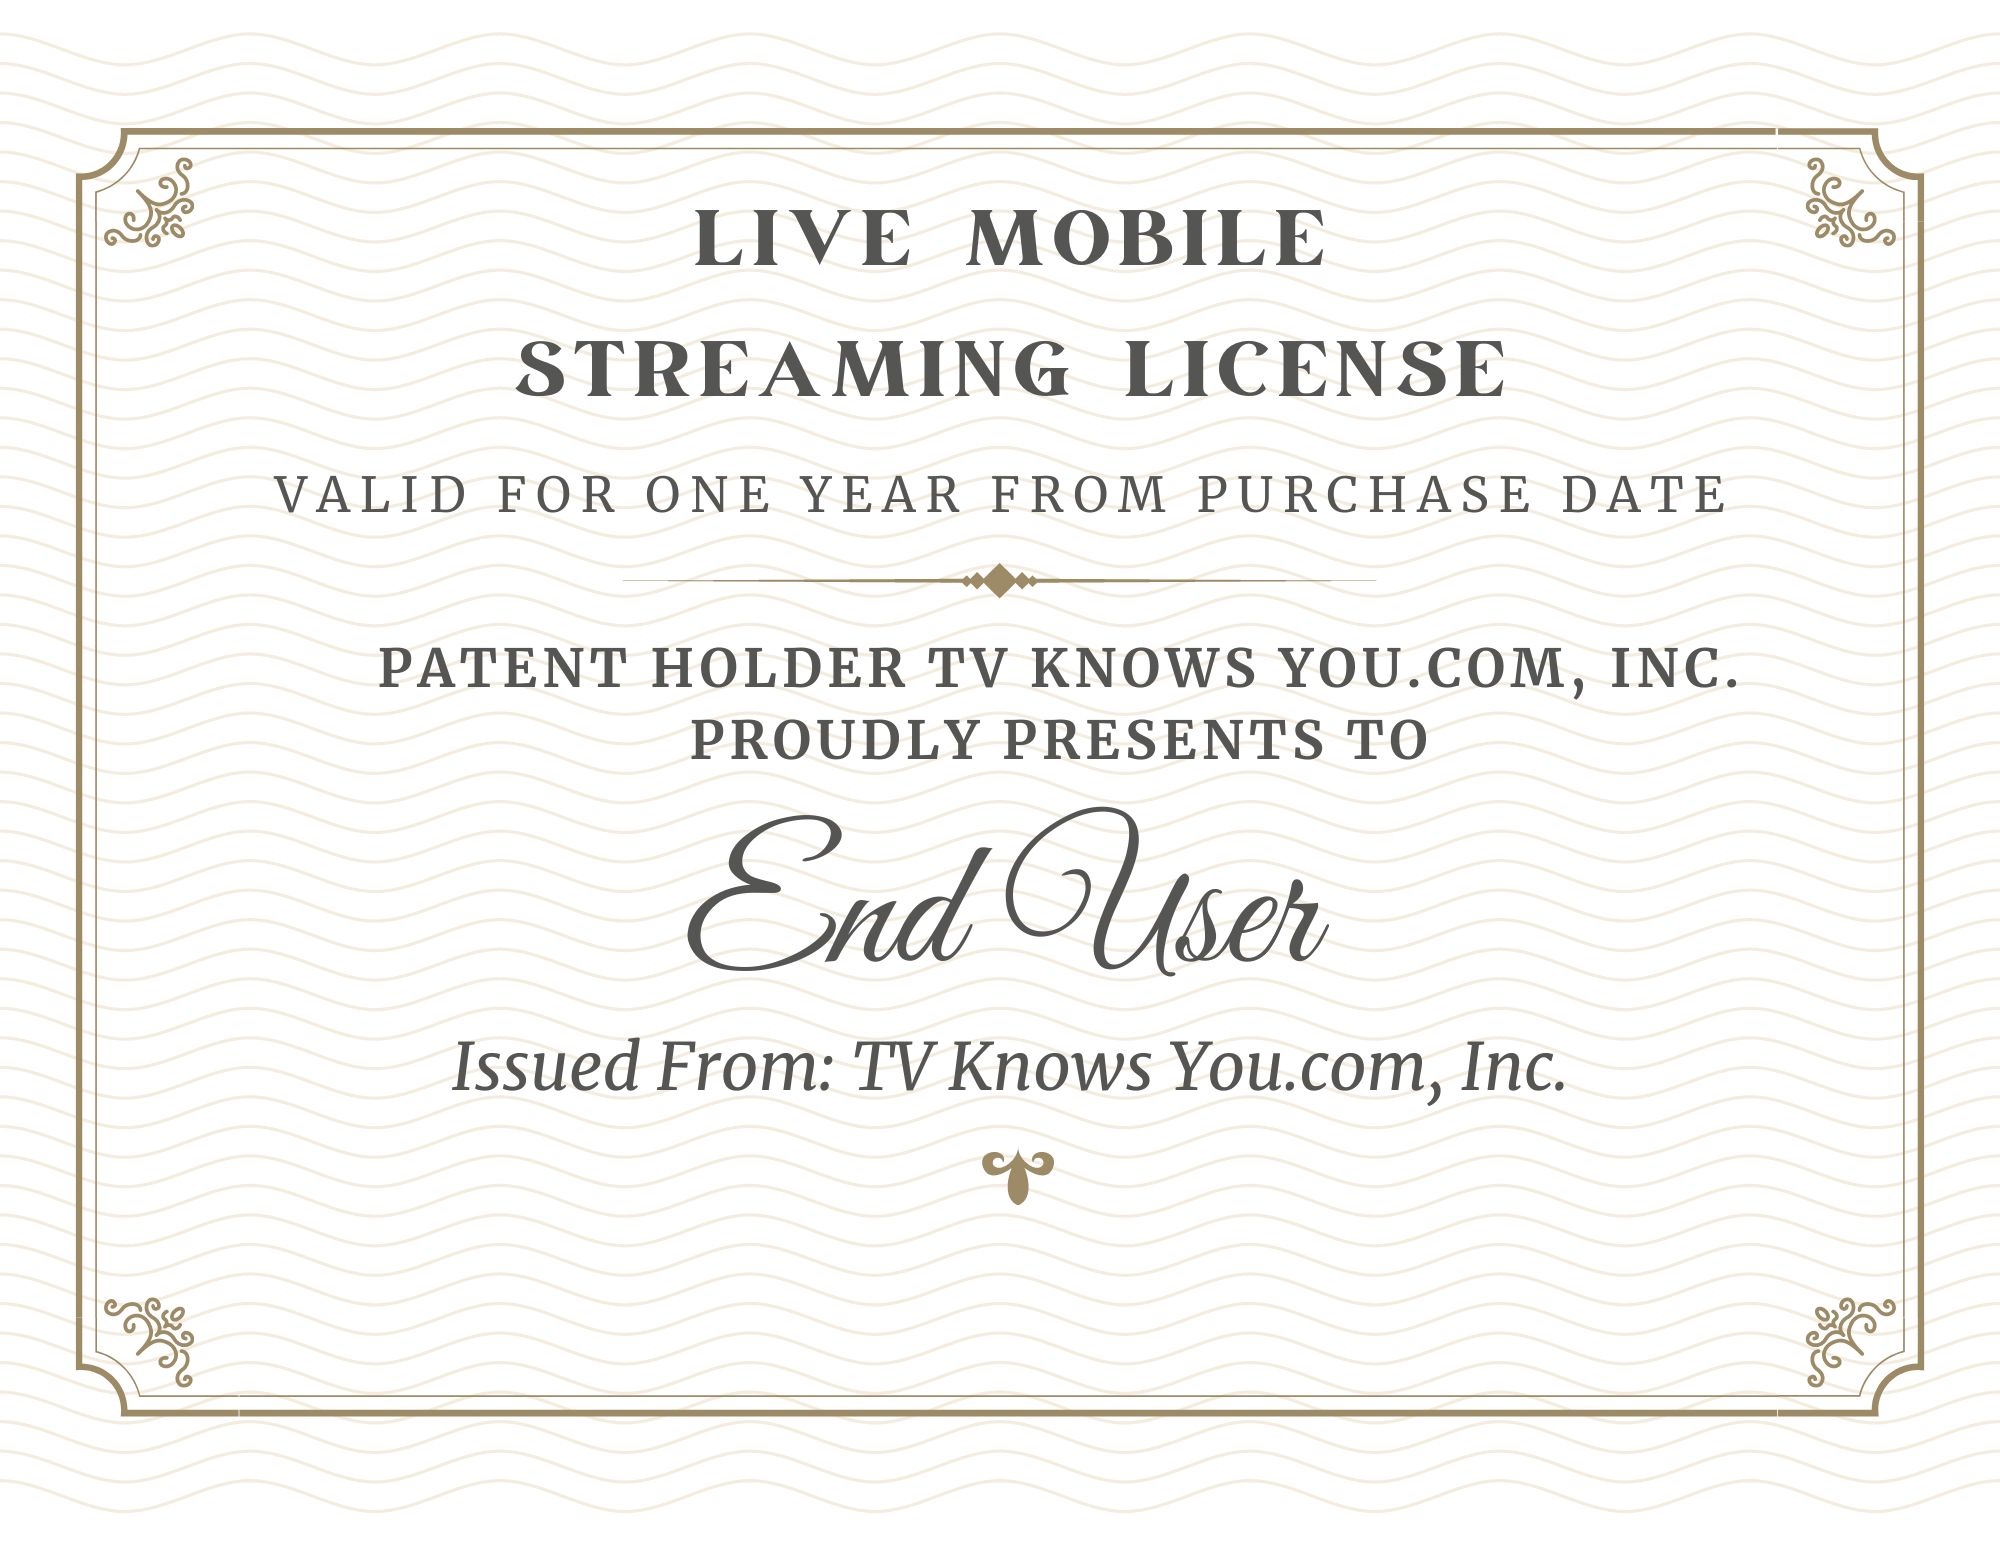 End User Yearly License